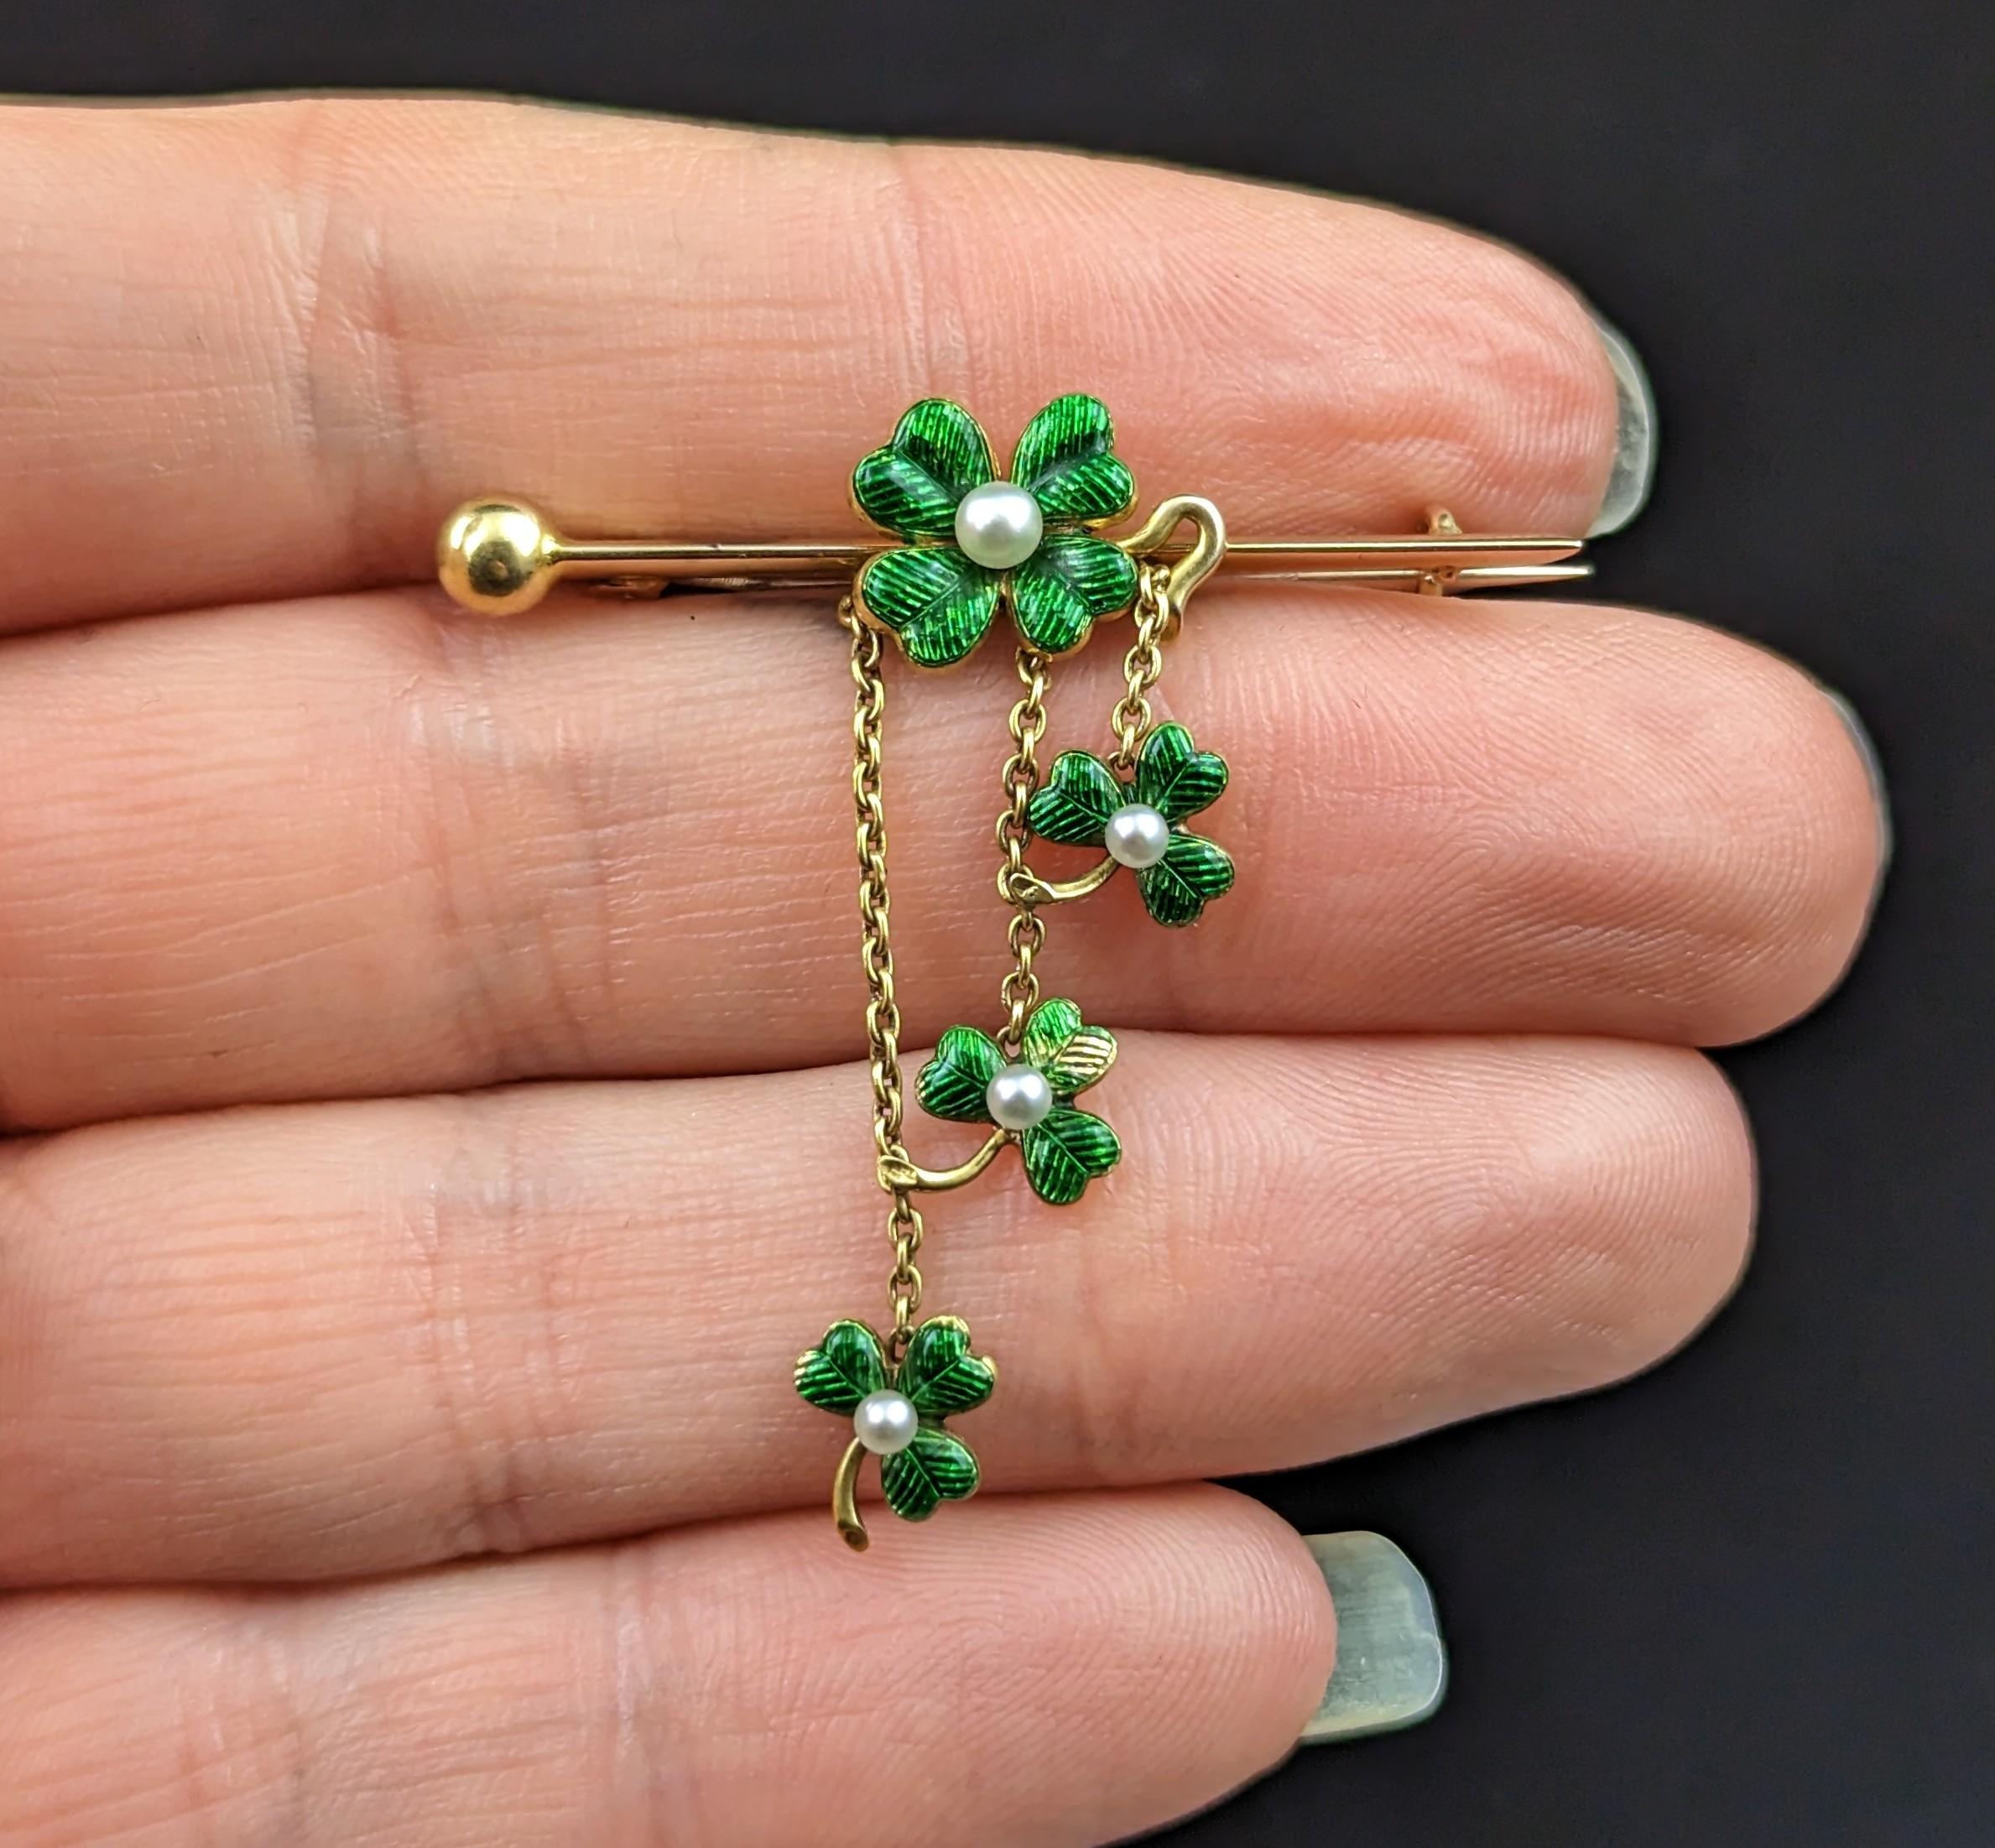 Victorian Antique Shamrock brooch, 15k gold, Guilloche enamel and seed pearl